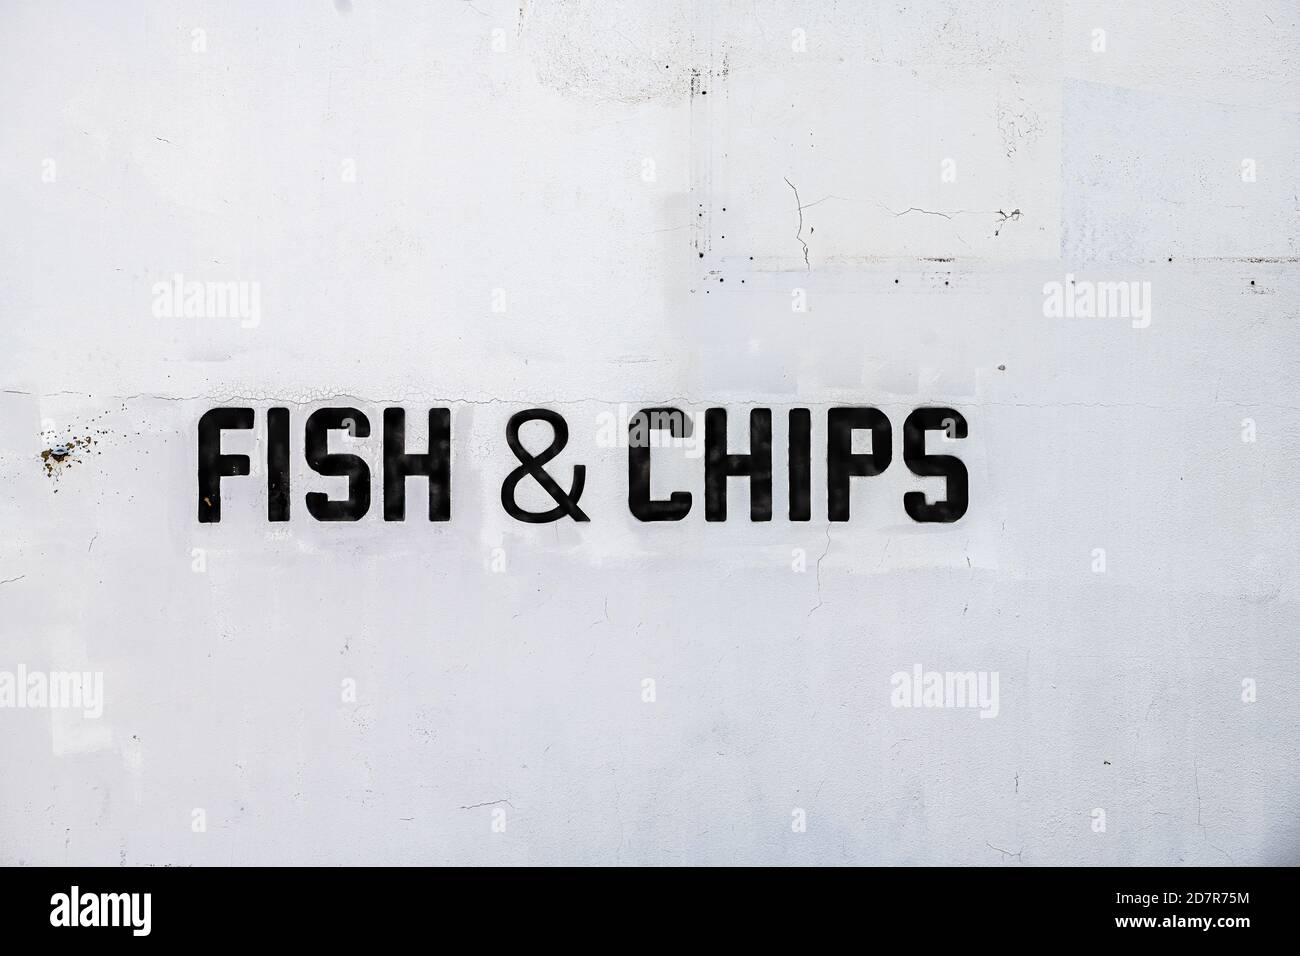 Restaurant pub menu sign on street white building wall outside closeup with black text for fish and chips food Stock Photo